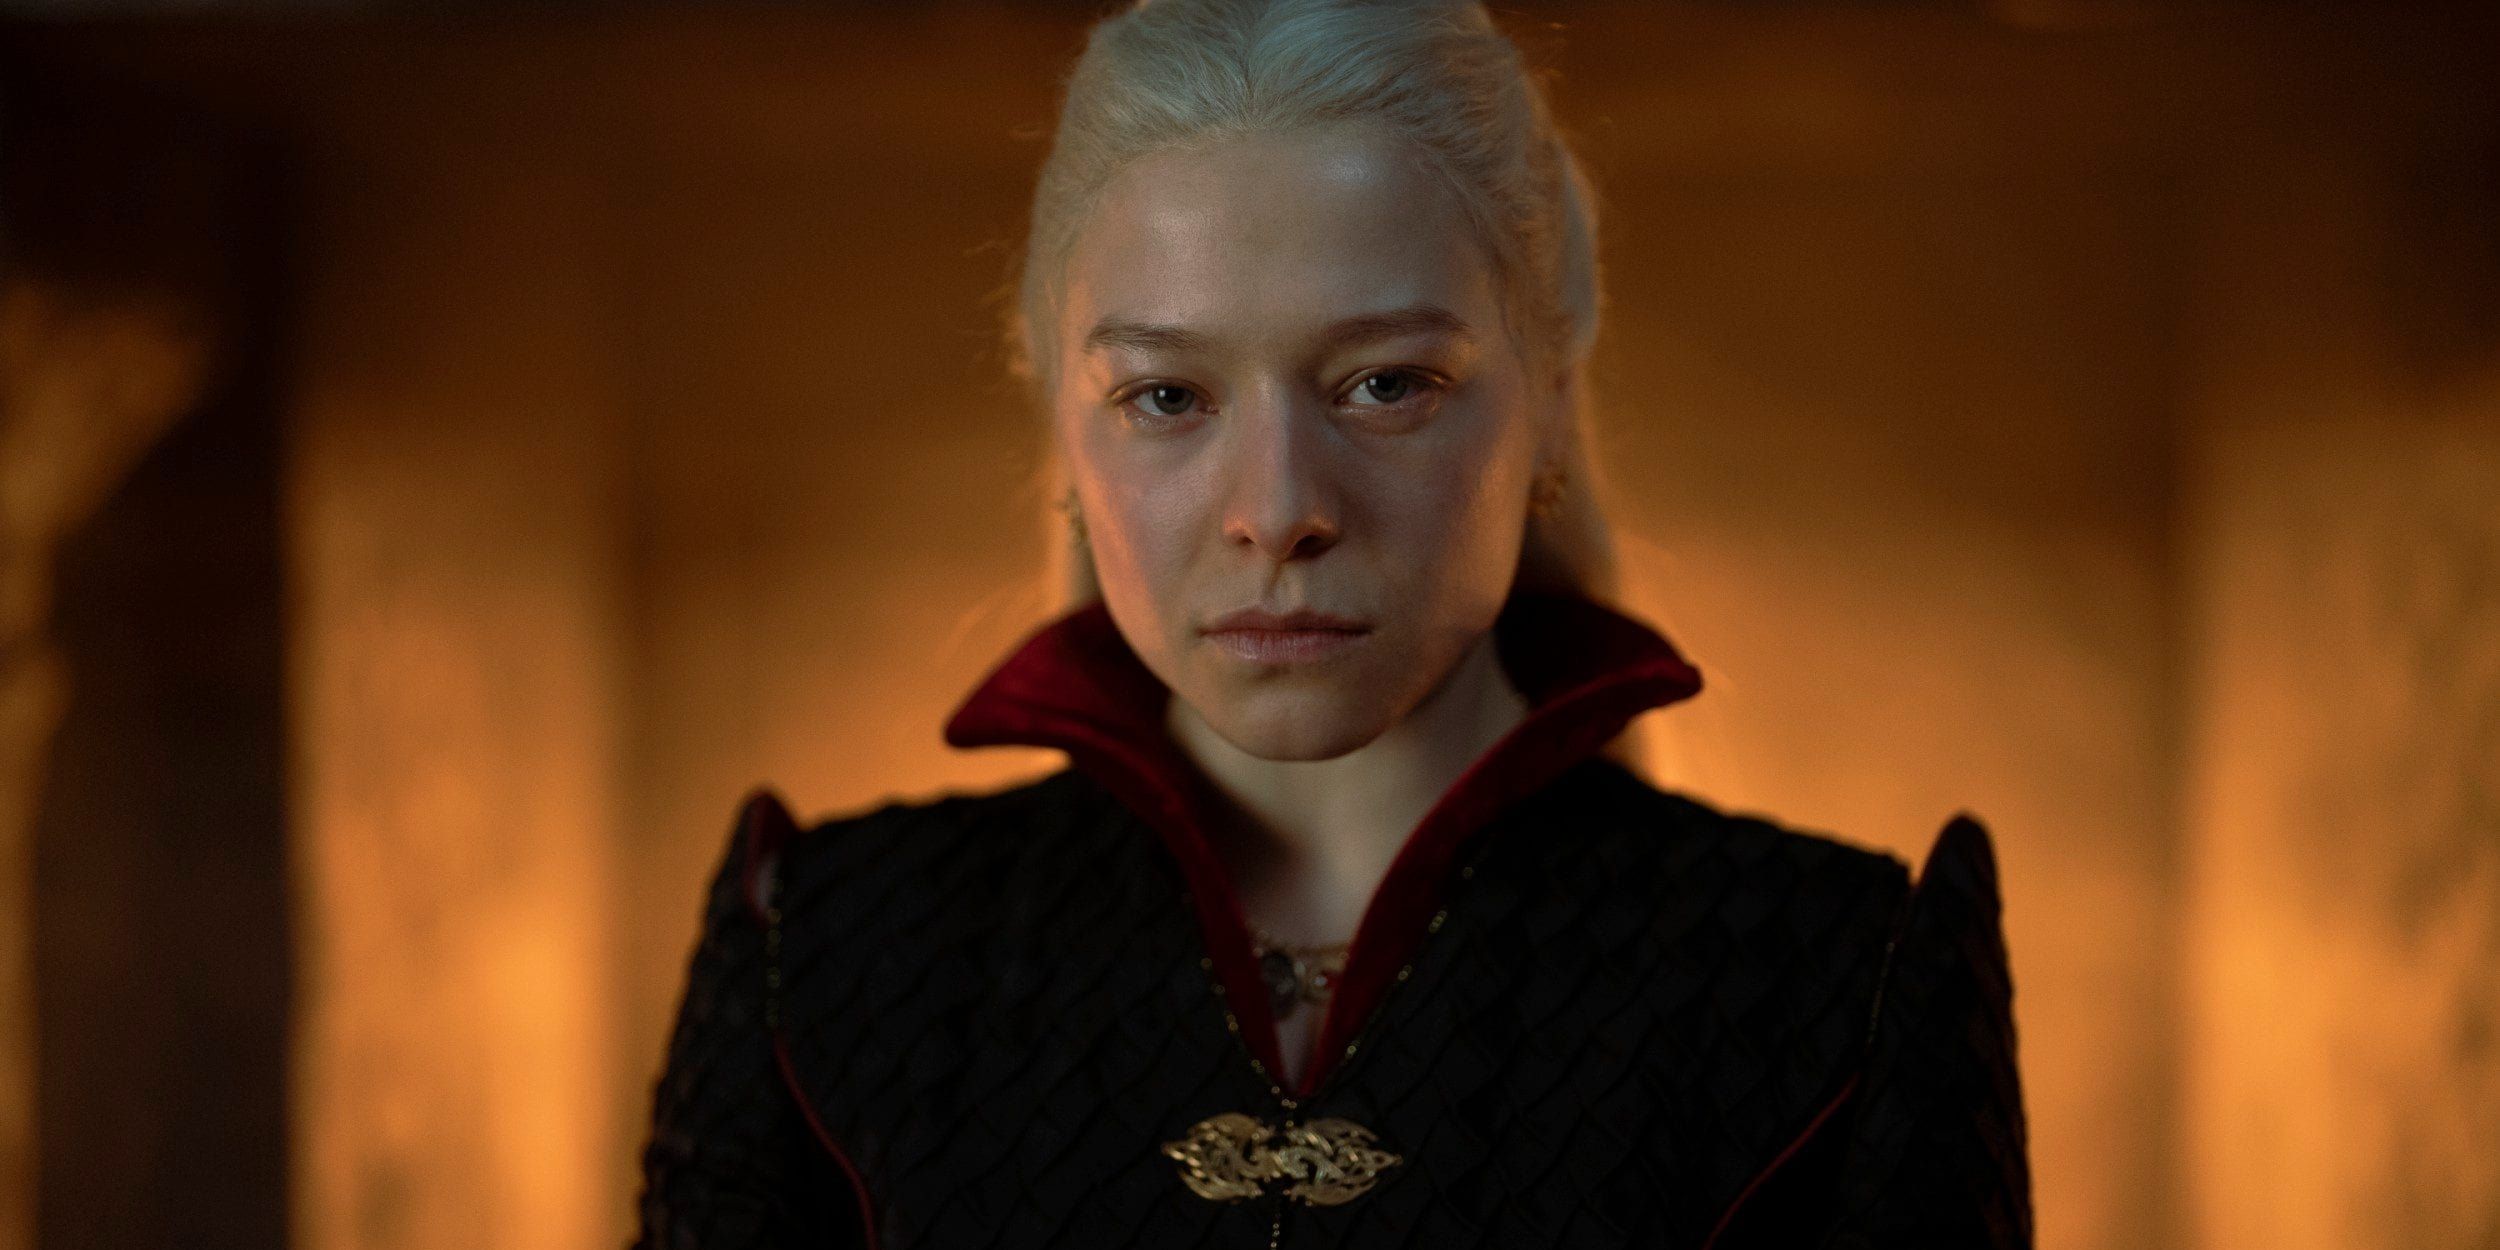 Rhaenyra looking furious in the House of the Dragon season 1 finale